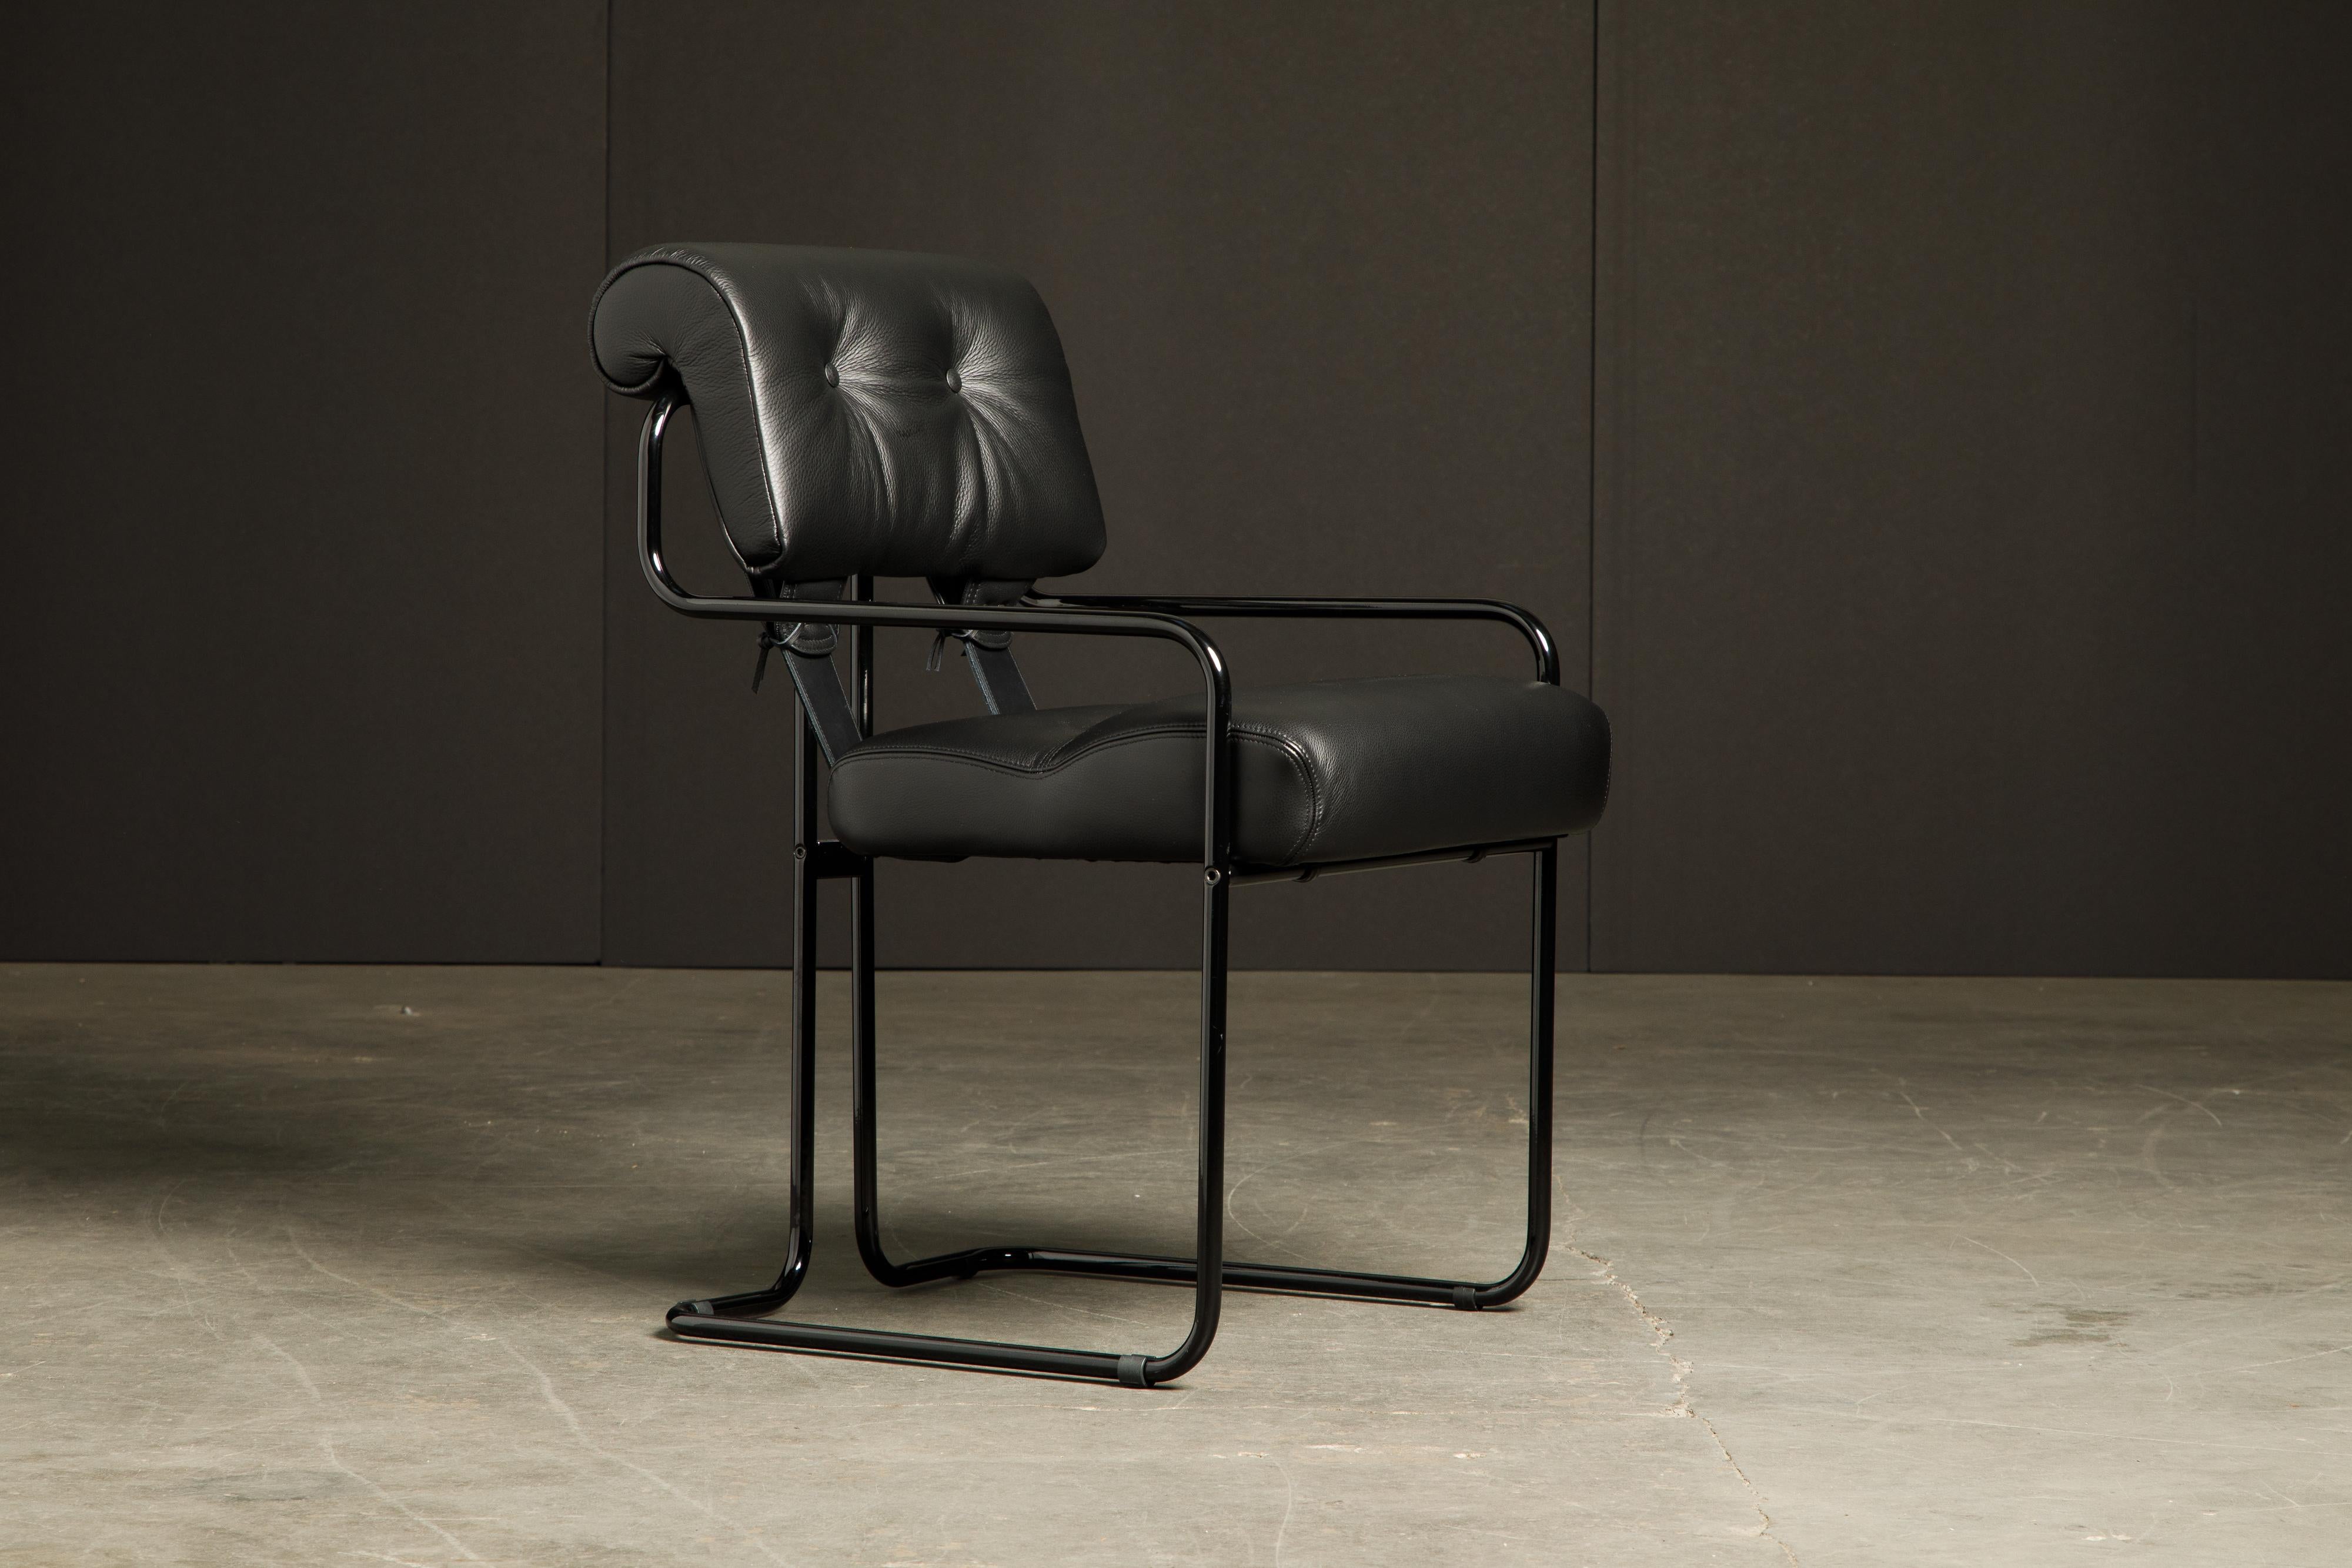 The most coveted dining chairs by interior designers are 'Tucroma' chairs by Guido Faleschini for i4 Mariani, and we have this incredible set of twelve (12) Tucroma armchairs in beautiful black leather with lacquered black frames. The seats and